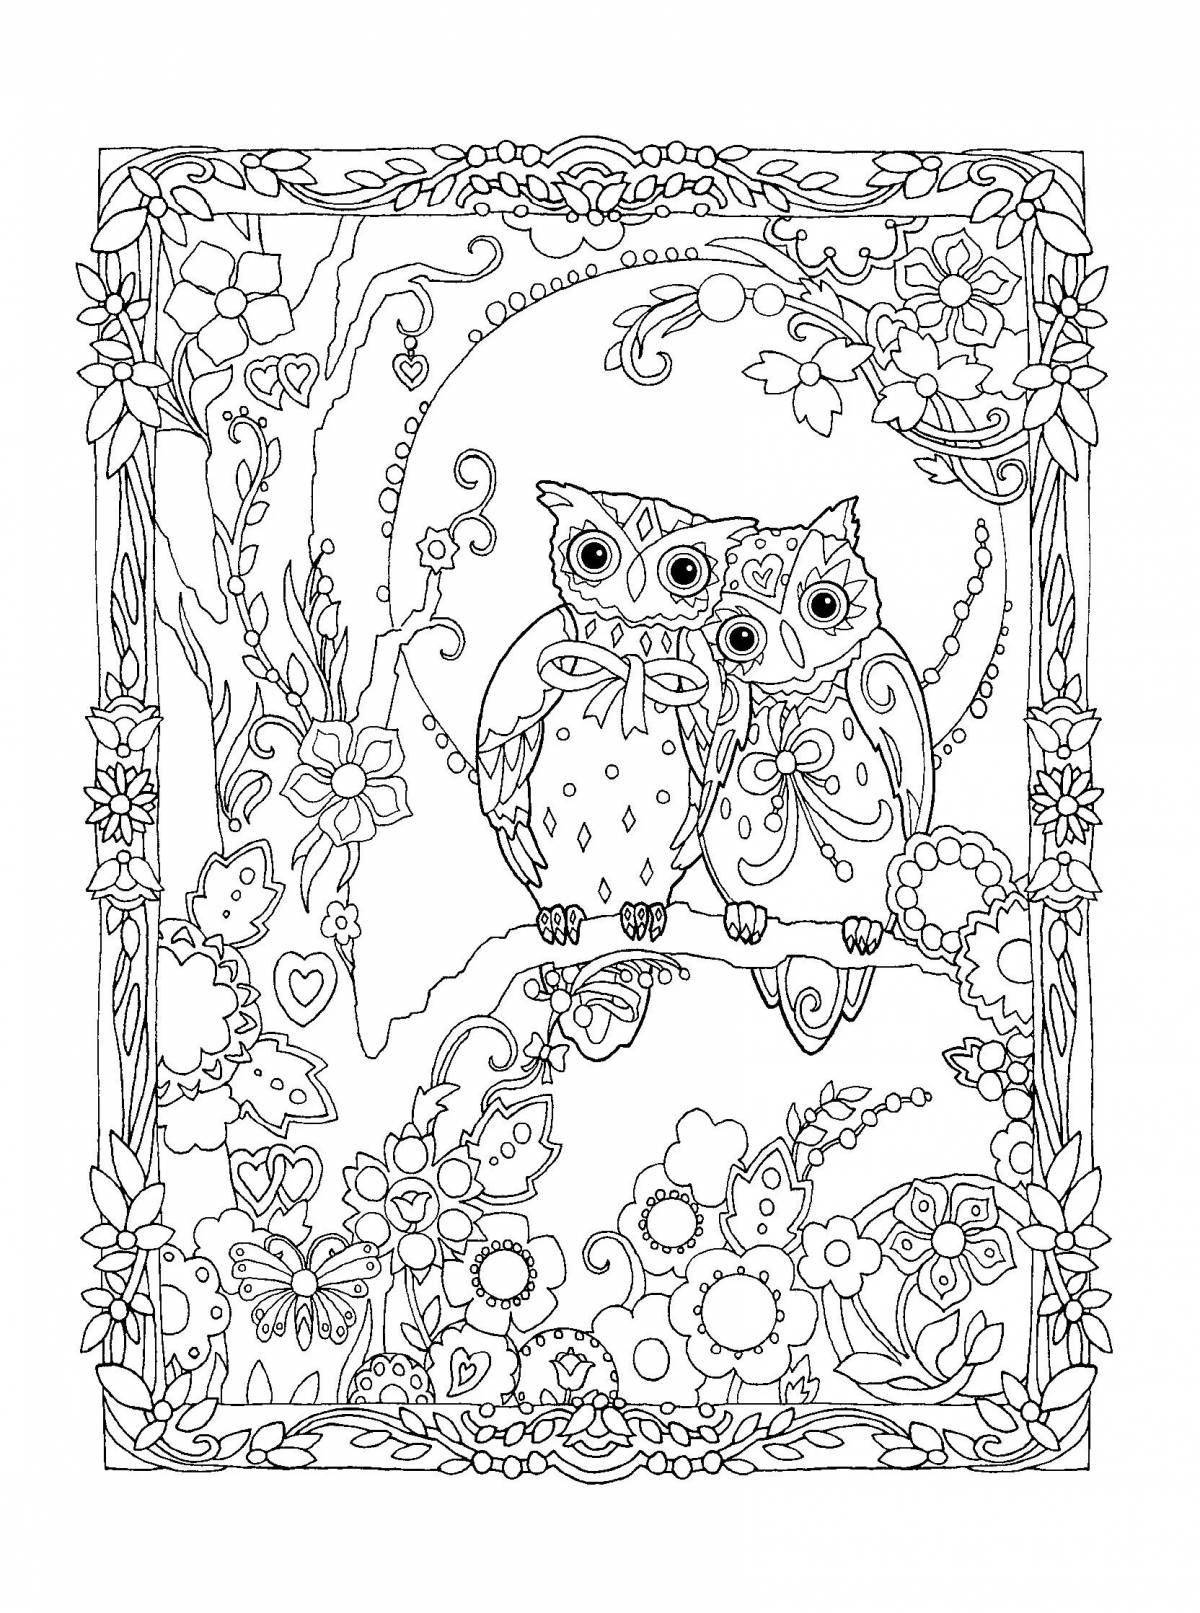 Colorful anti-stress owls coloring book